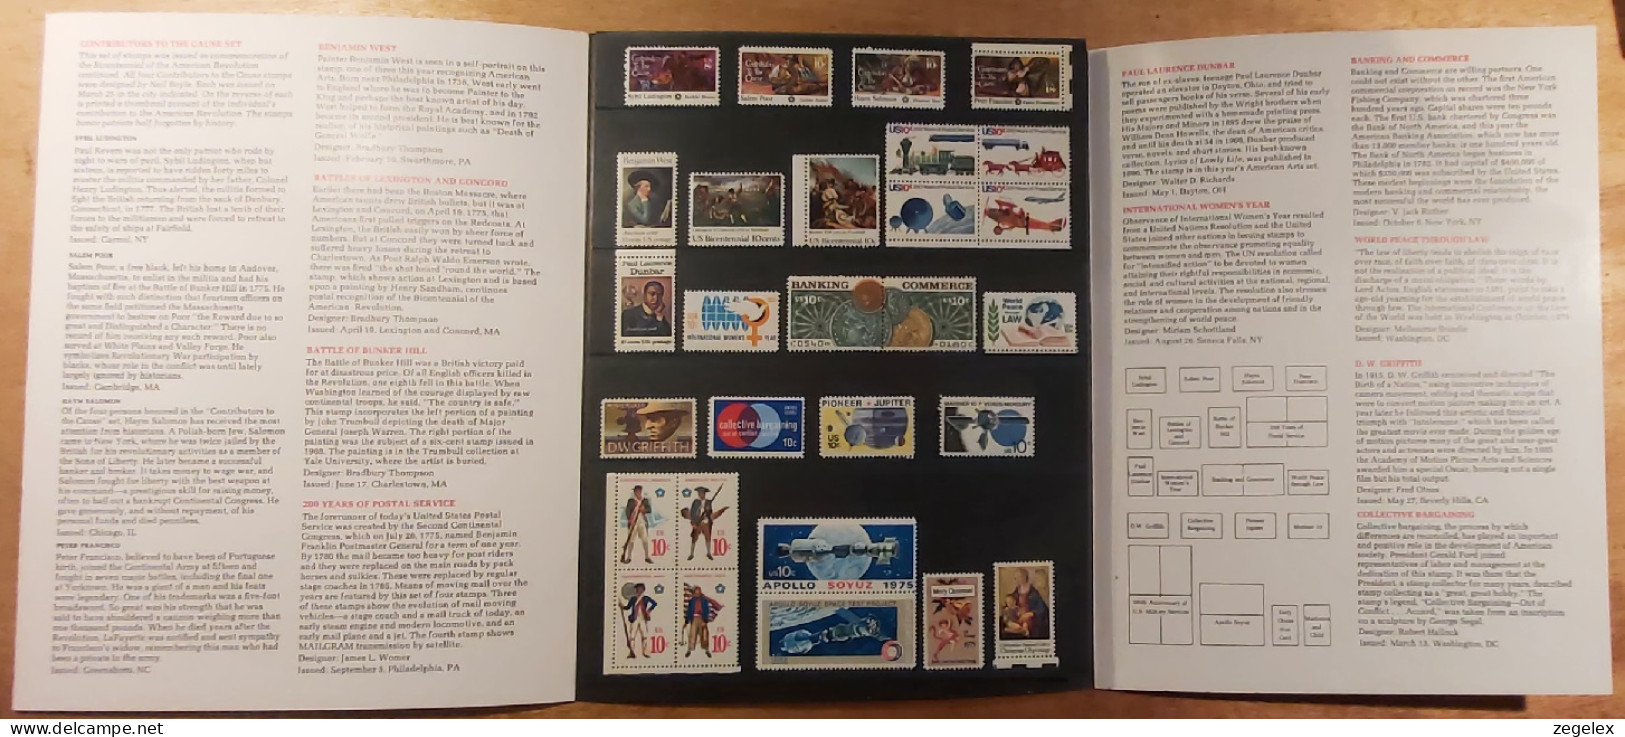 USA Postal Service Mint Set Of 1975 Commemorative And Special Stamps. MNH** - Años Completos